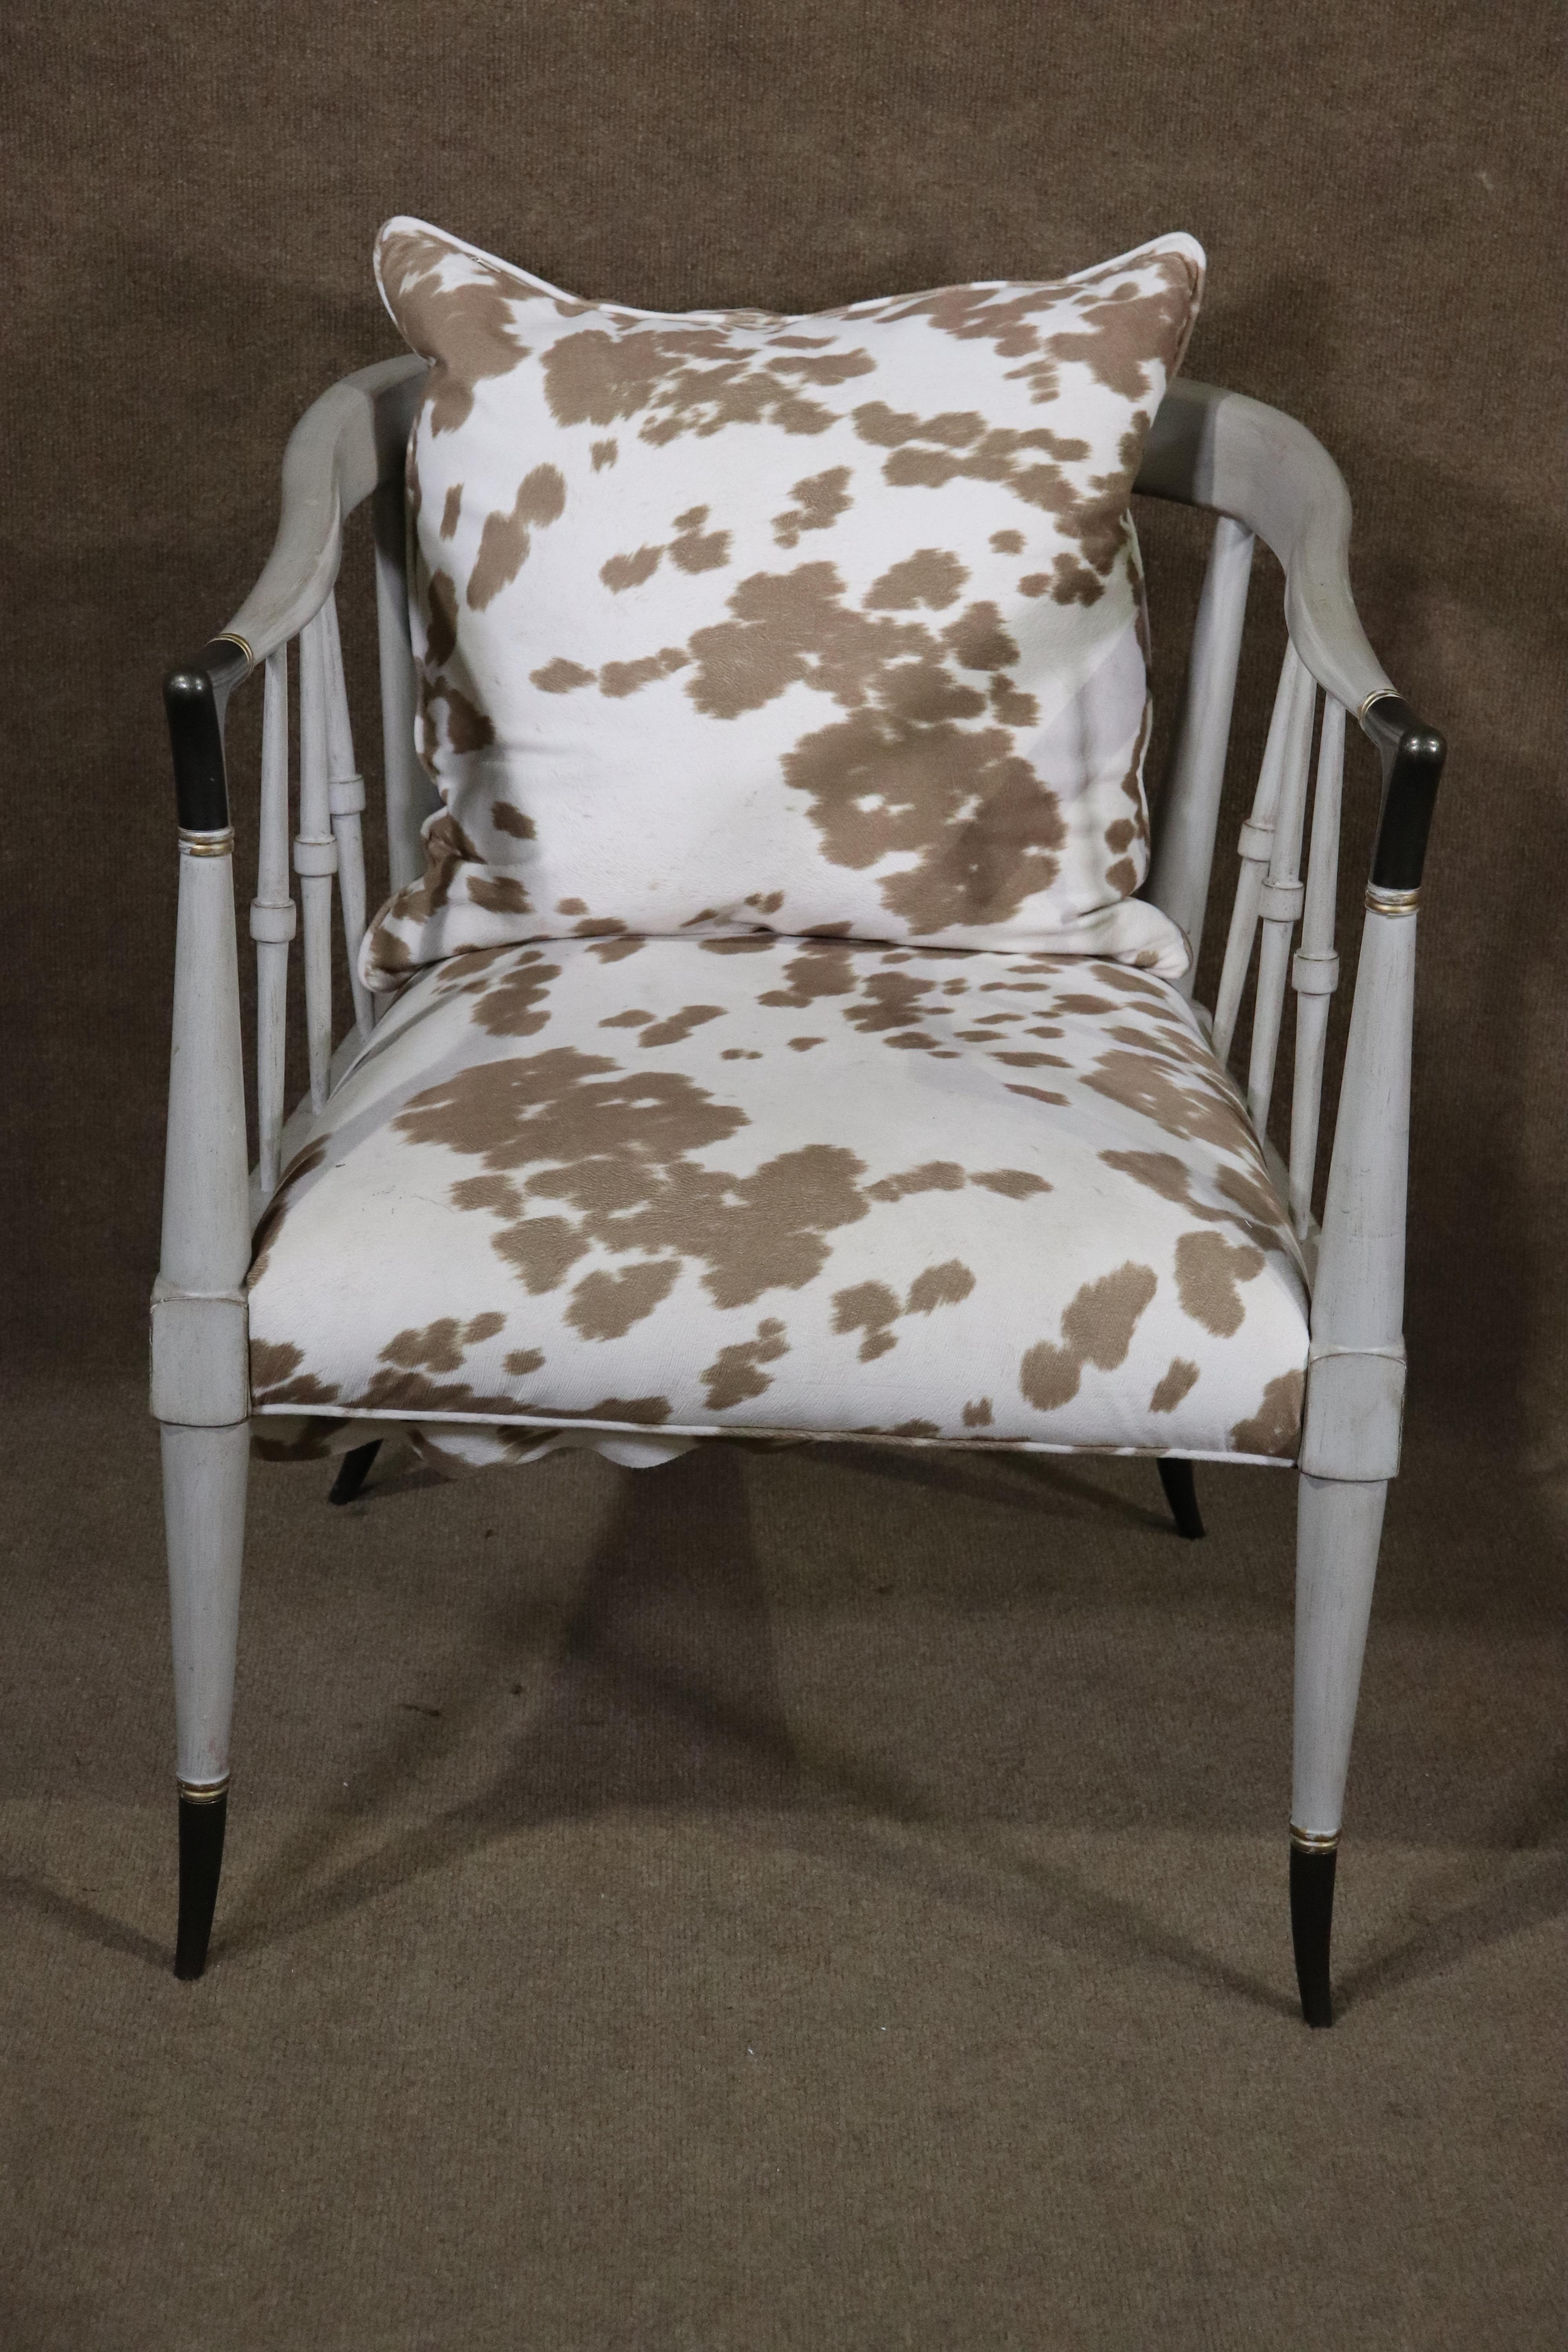 Unique side chair with cowhide pillows and bull horn shaped frame.
Please confirm location NY or NJ